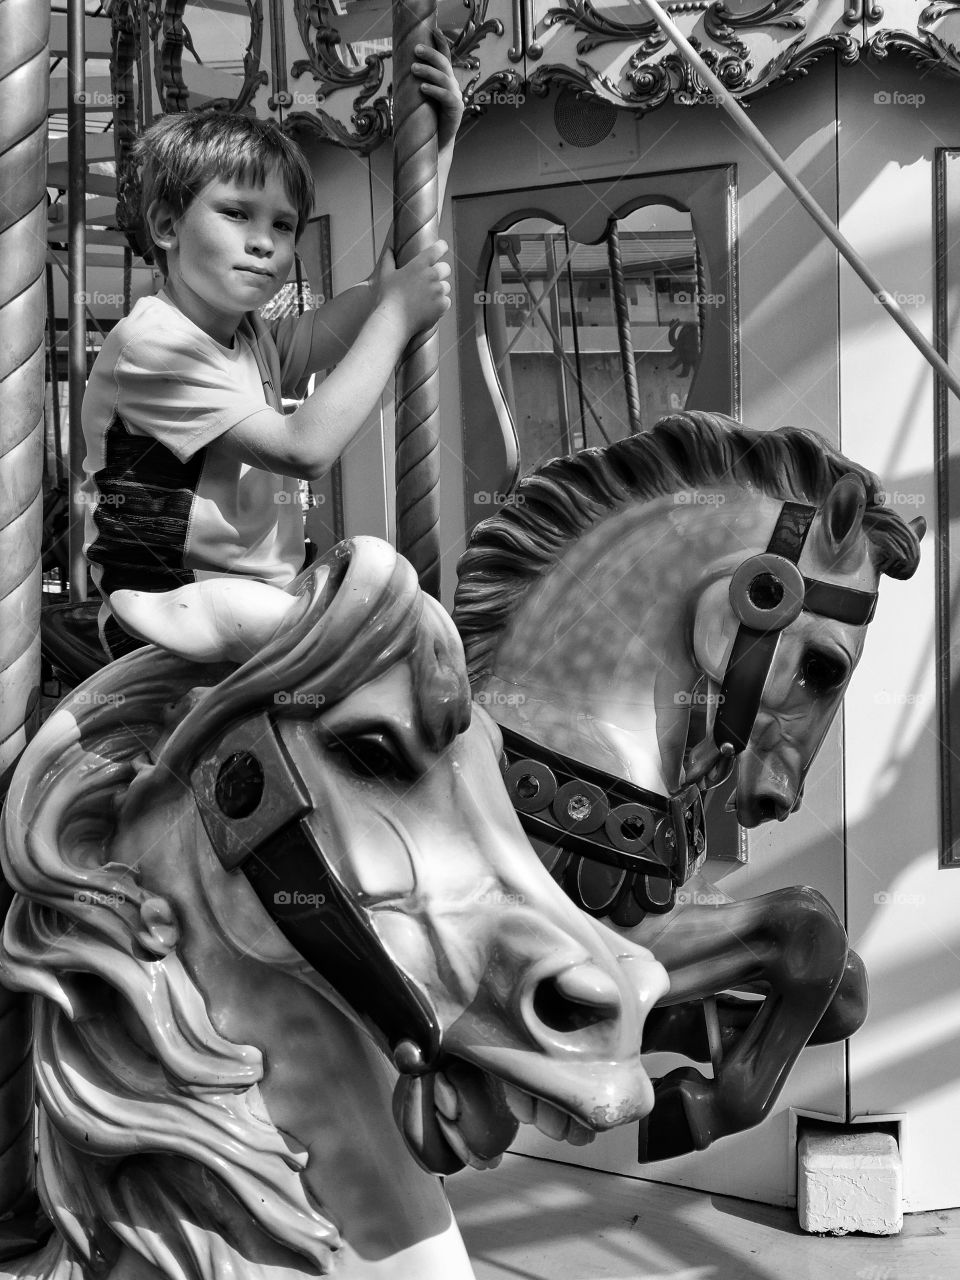 Boy Riding A Carousel. Young Boy Riding On A Restored Vintage Carousel
